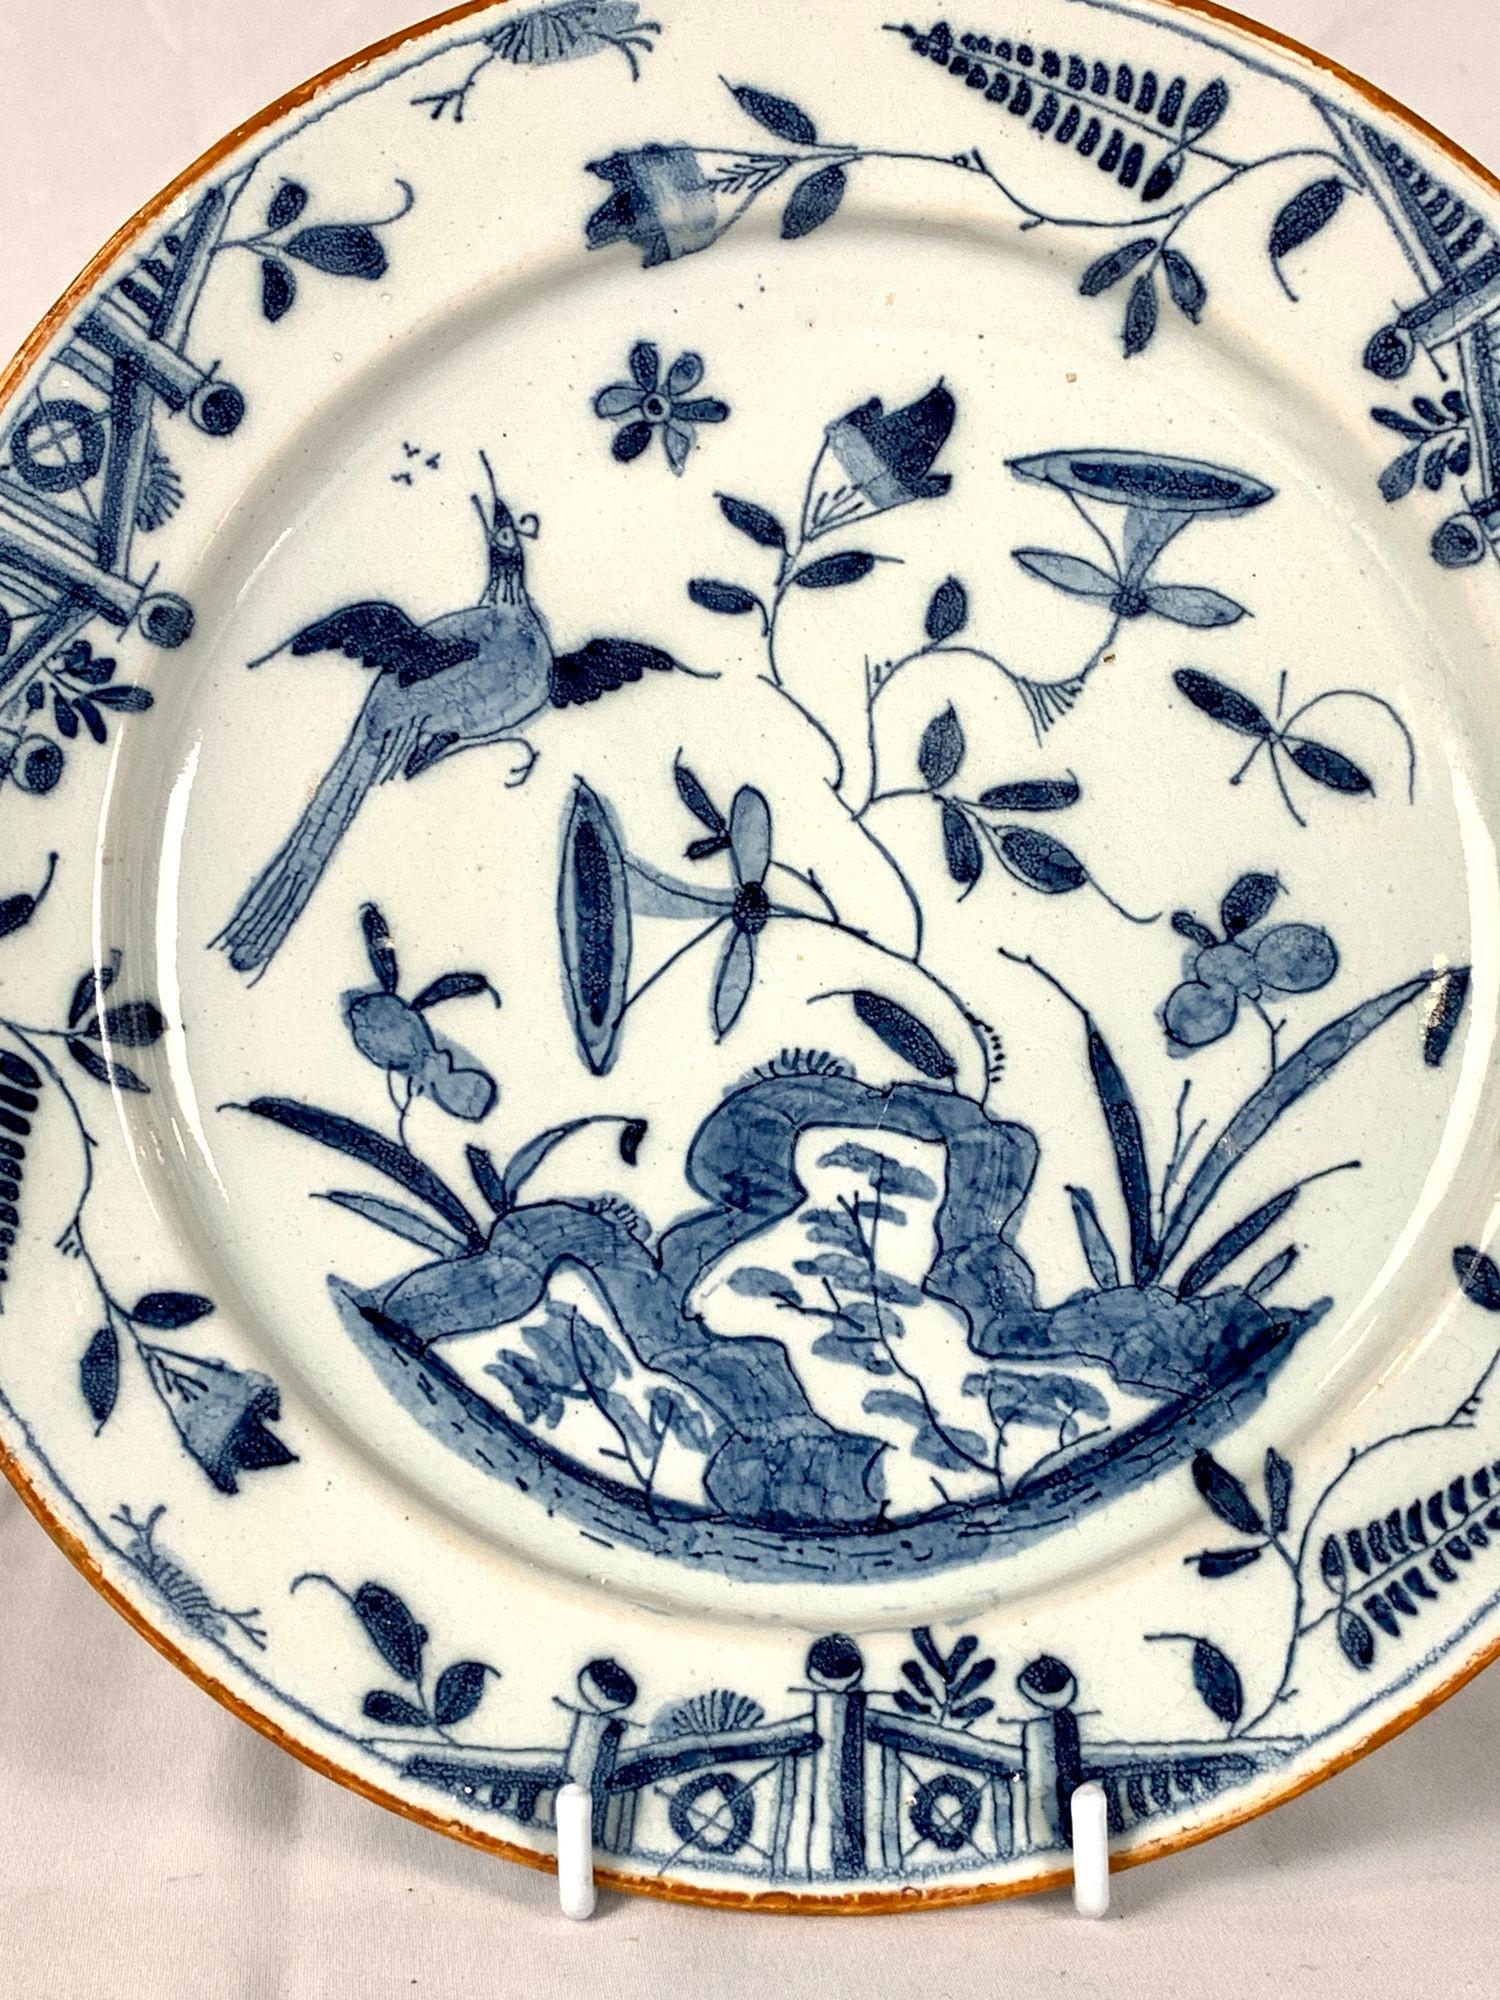 This beautiful blue and white delftware dish was hand painted in England around 1760.
It features a lively garden scene with a butterfly hovering on one side and a songbird in flight her head tilted up in song on the other.
The scene is set against